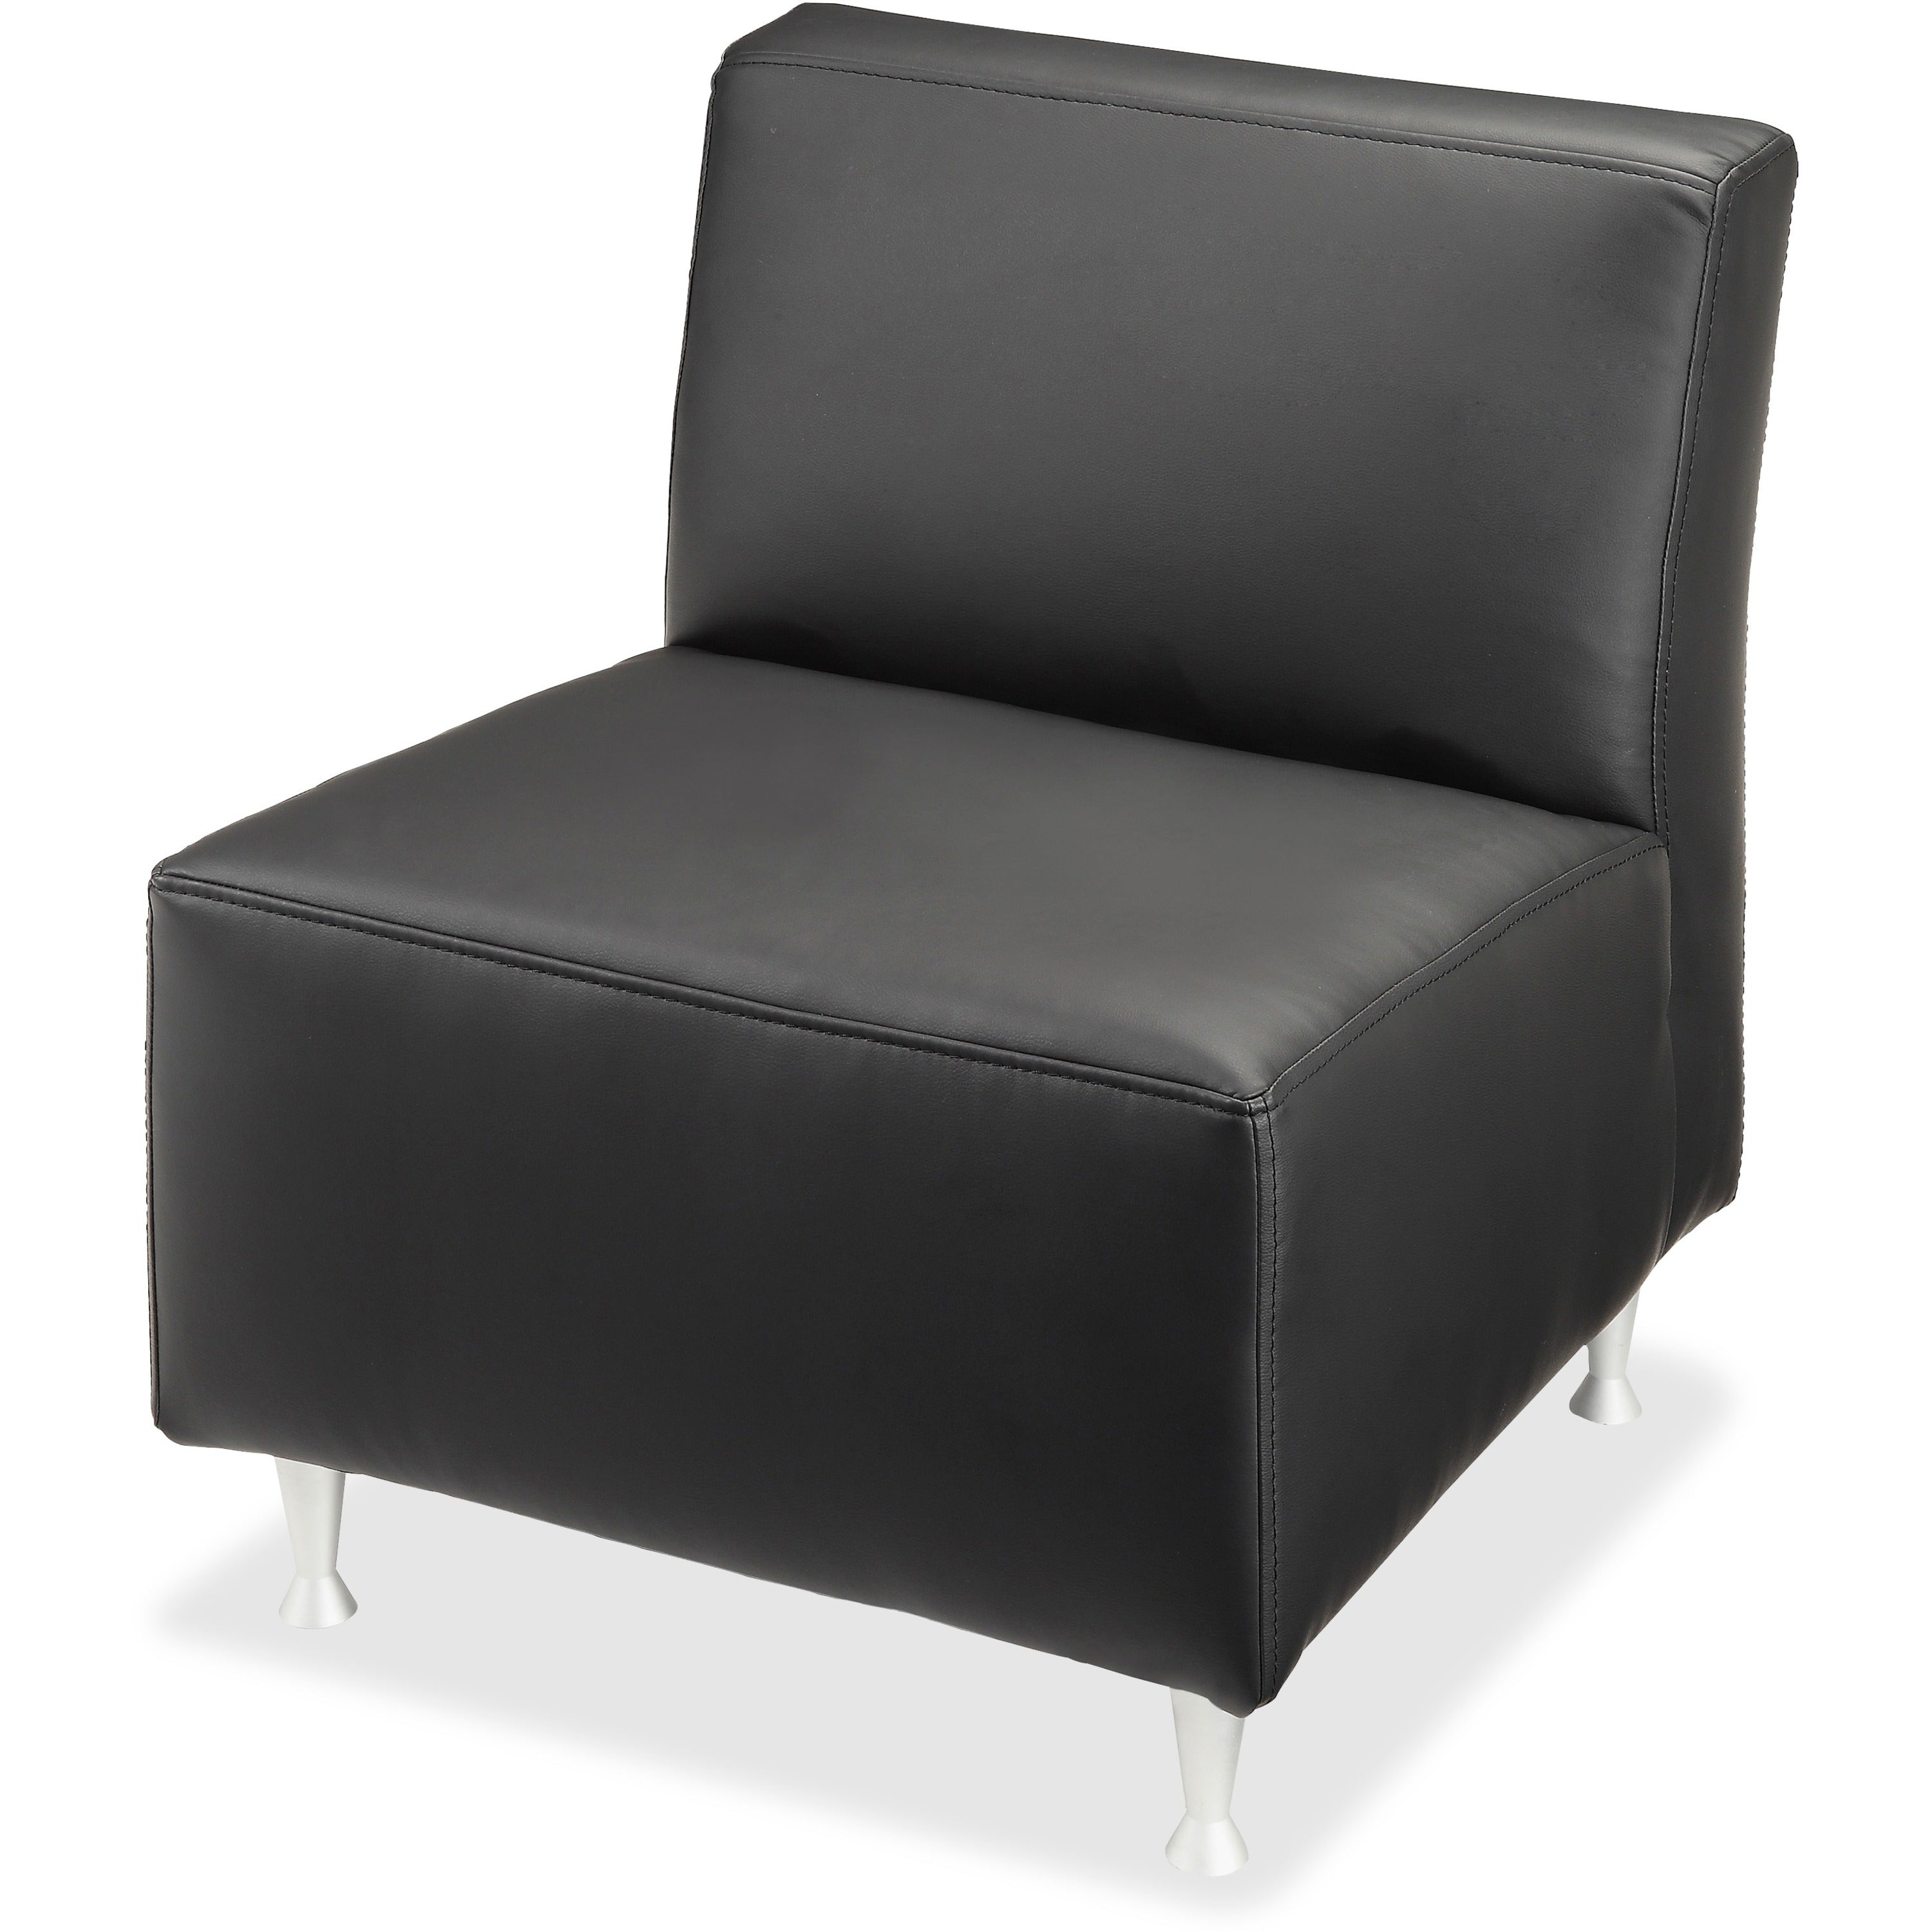 lorell-fuze-modular-series-armless-lounge-chair-black-leather-seat-black-leather-back-brushed-aluminum-frame-high-back-1-each_llr86917 - 1